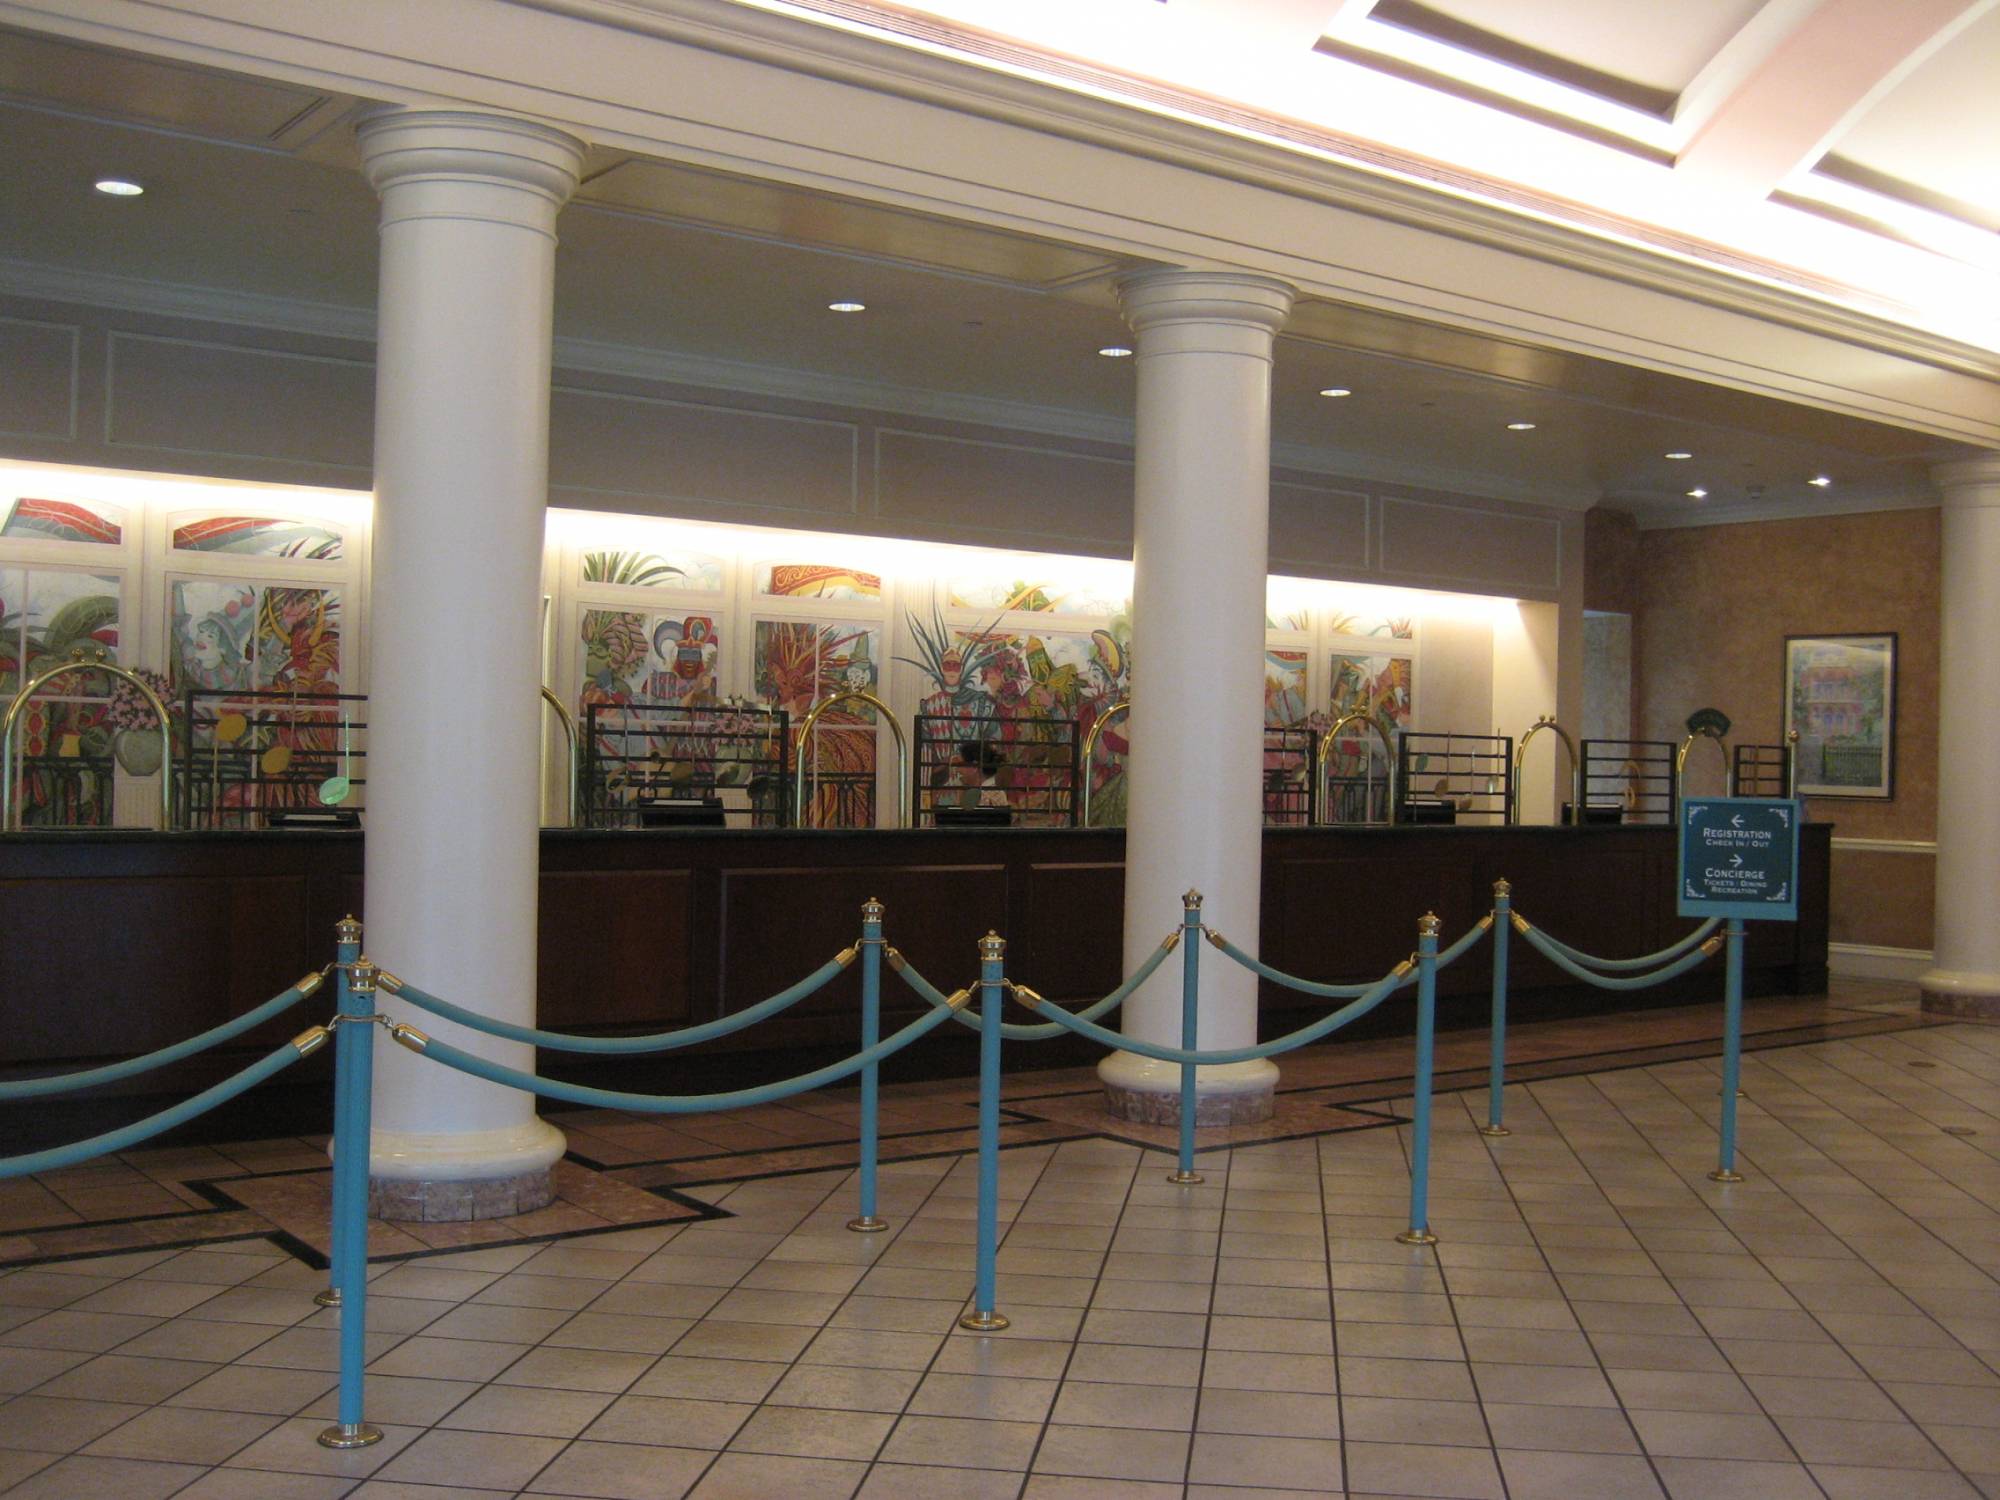 Port Orleans French Quarter - Check in Area